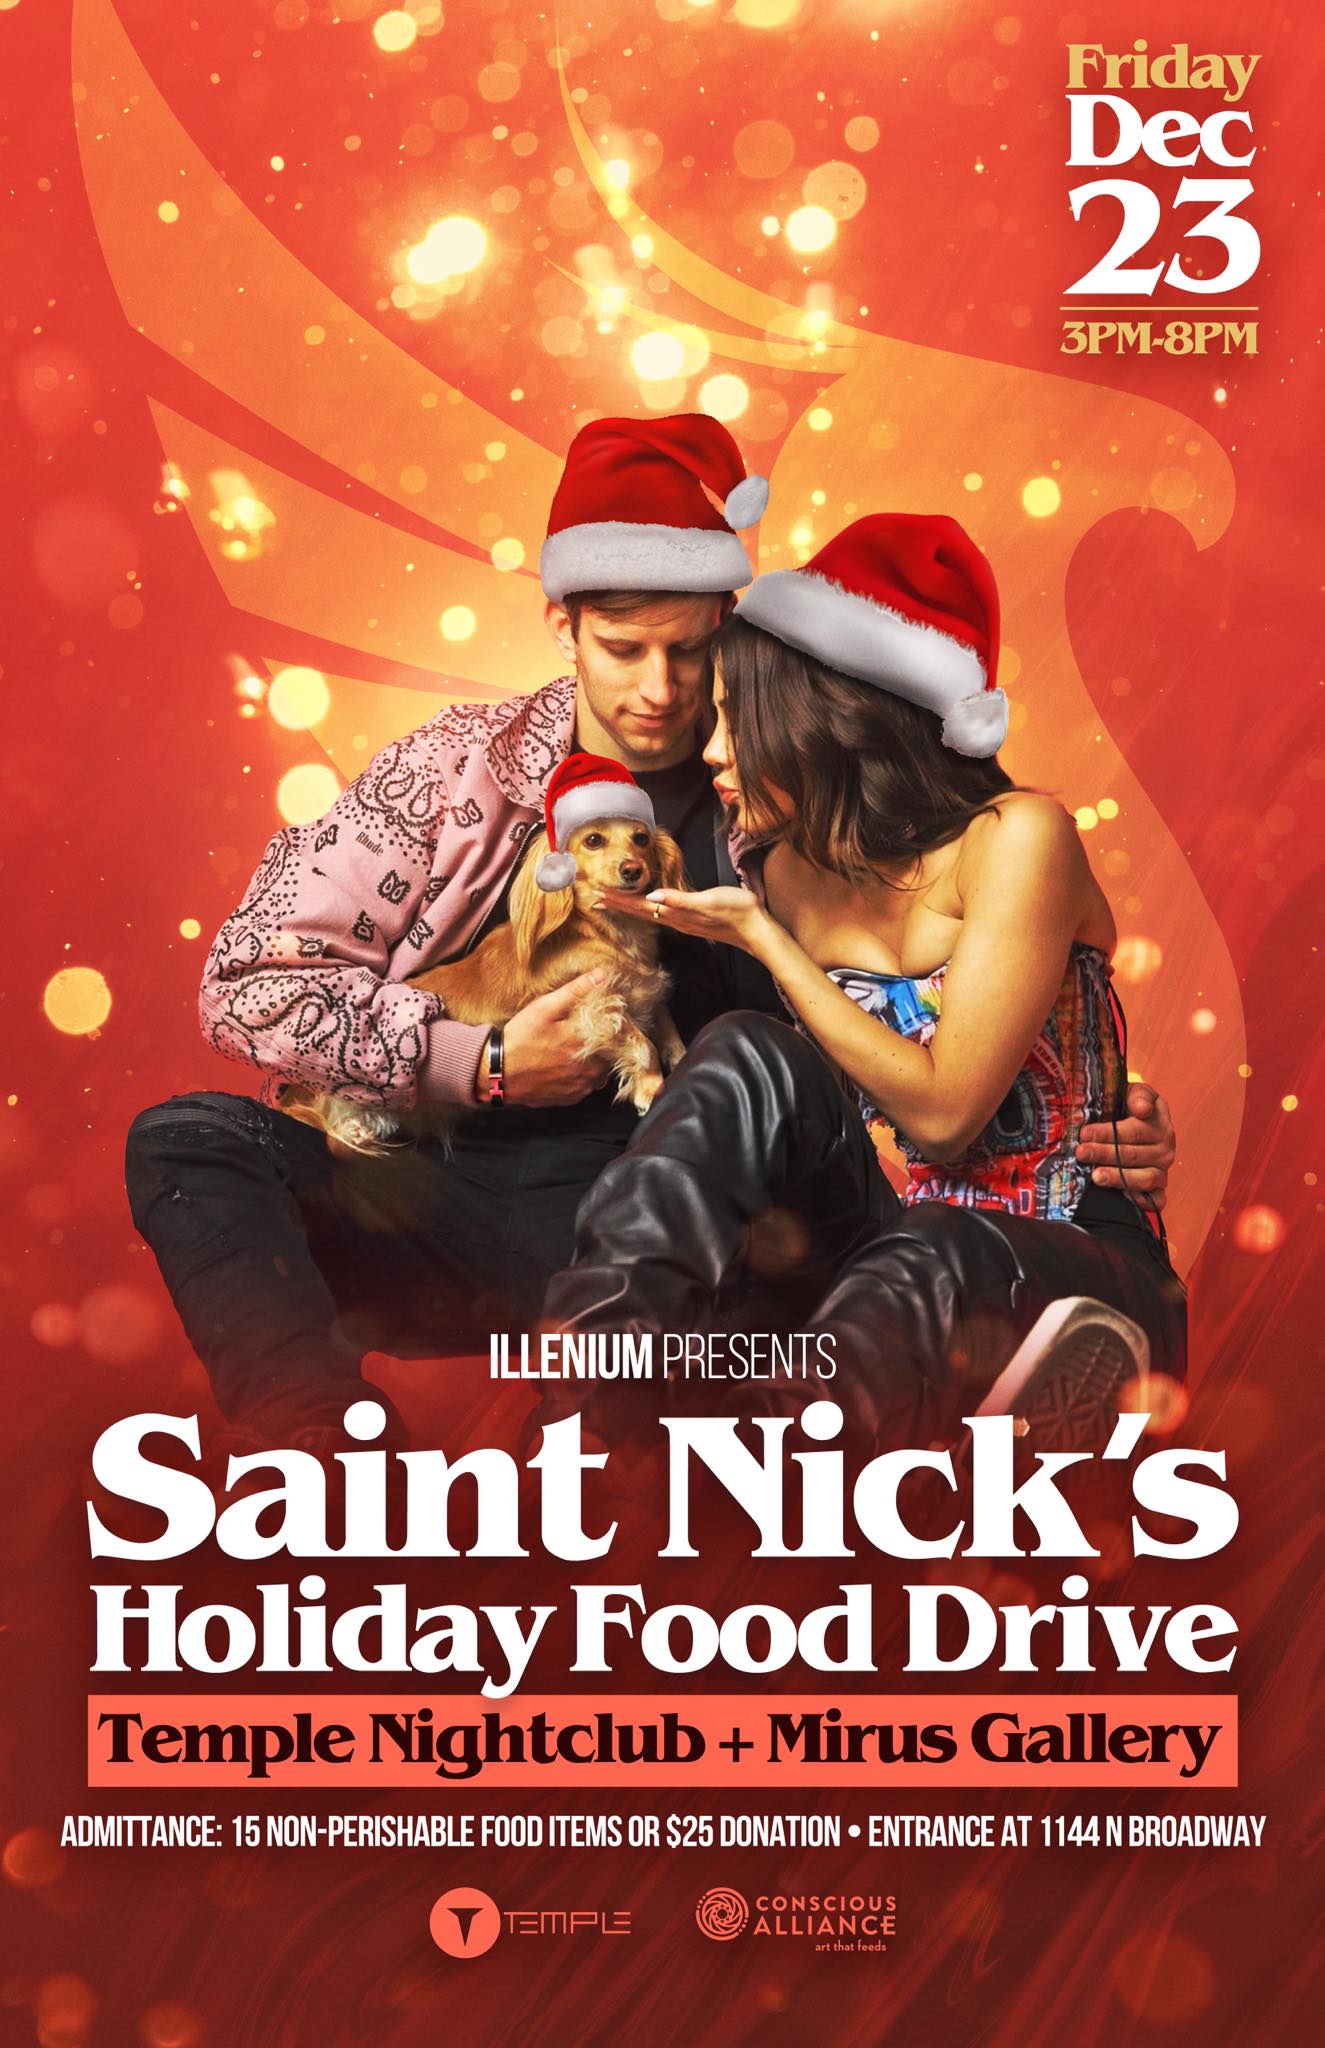 Saint Nick's Holiday Food Drive with ILLENIUM